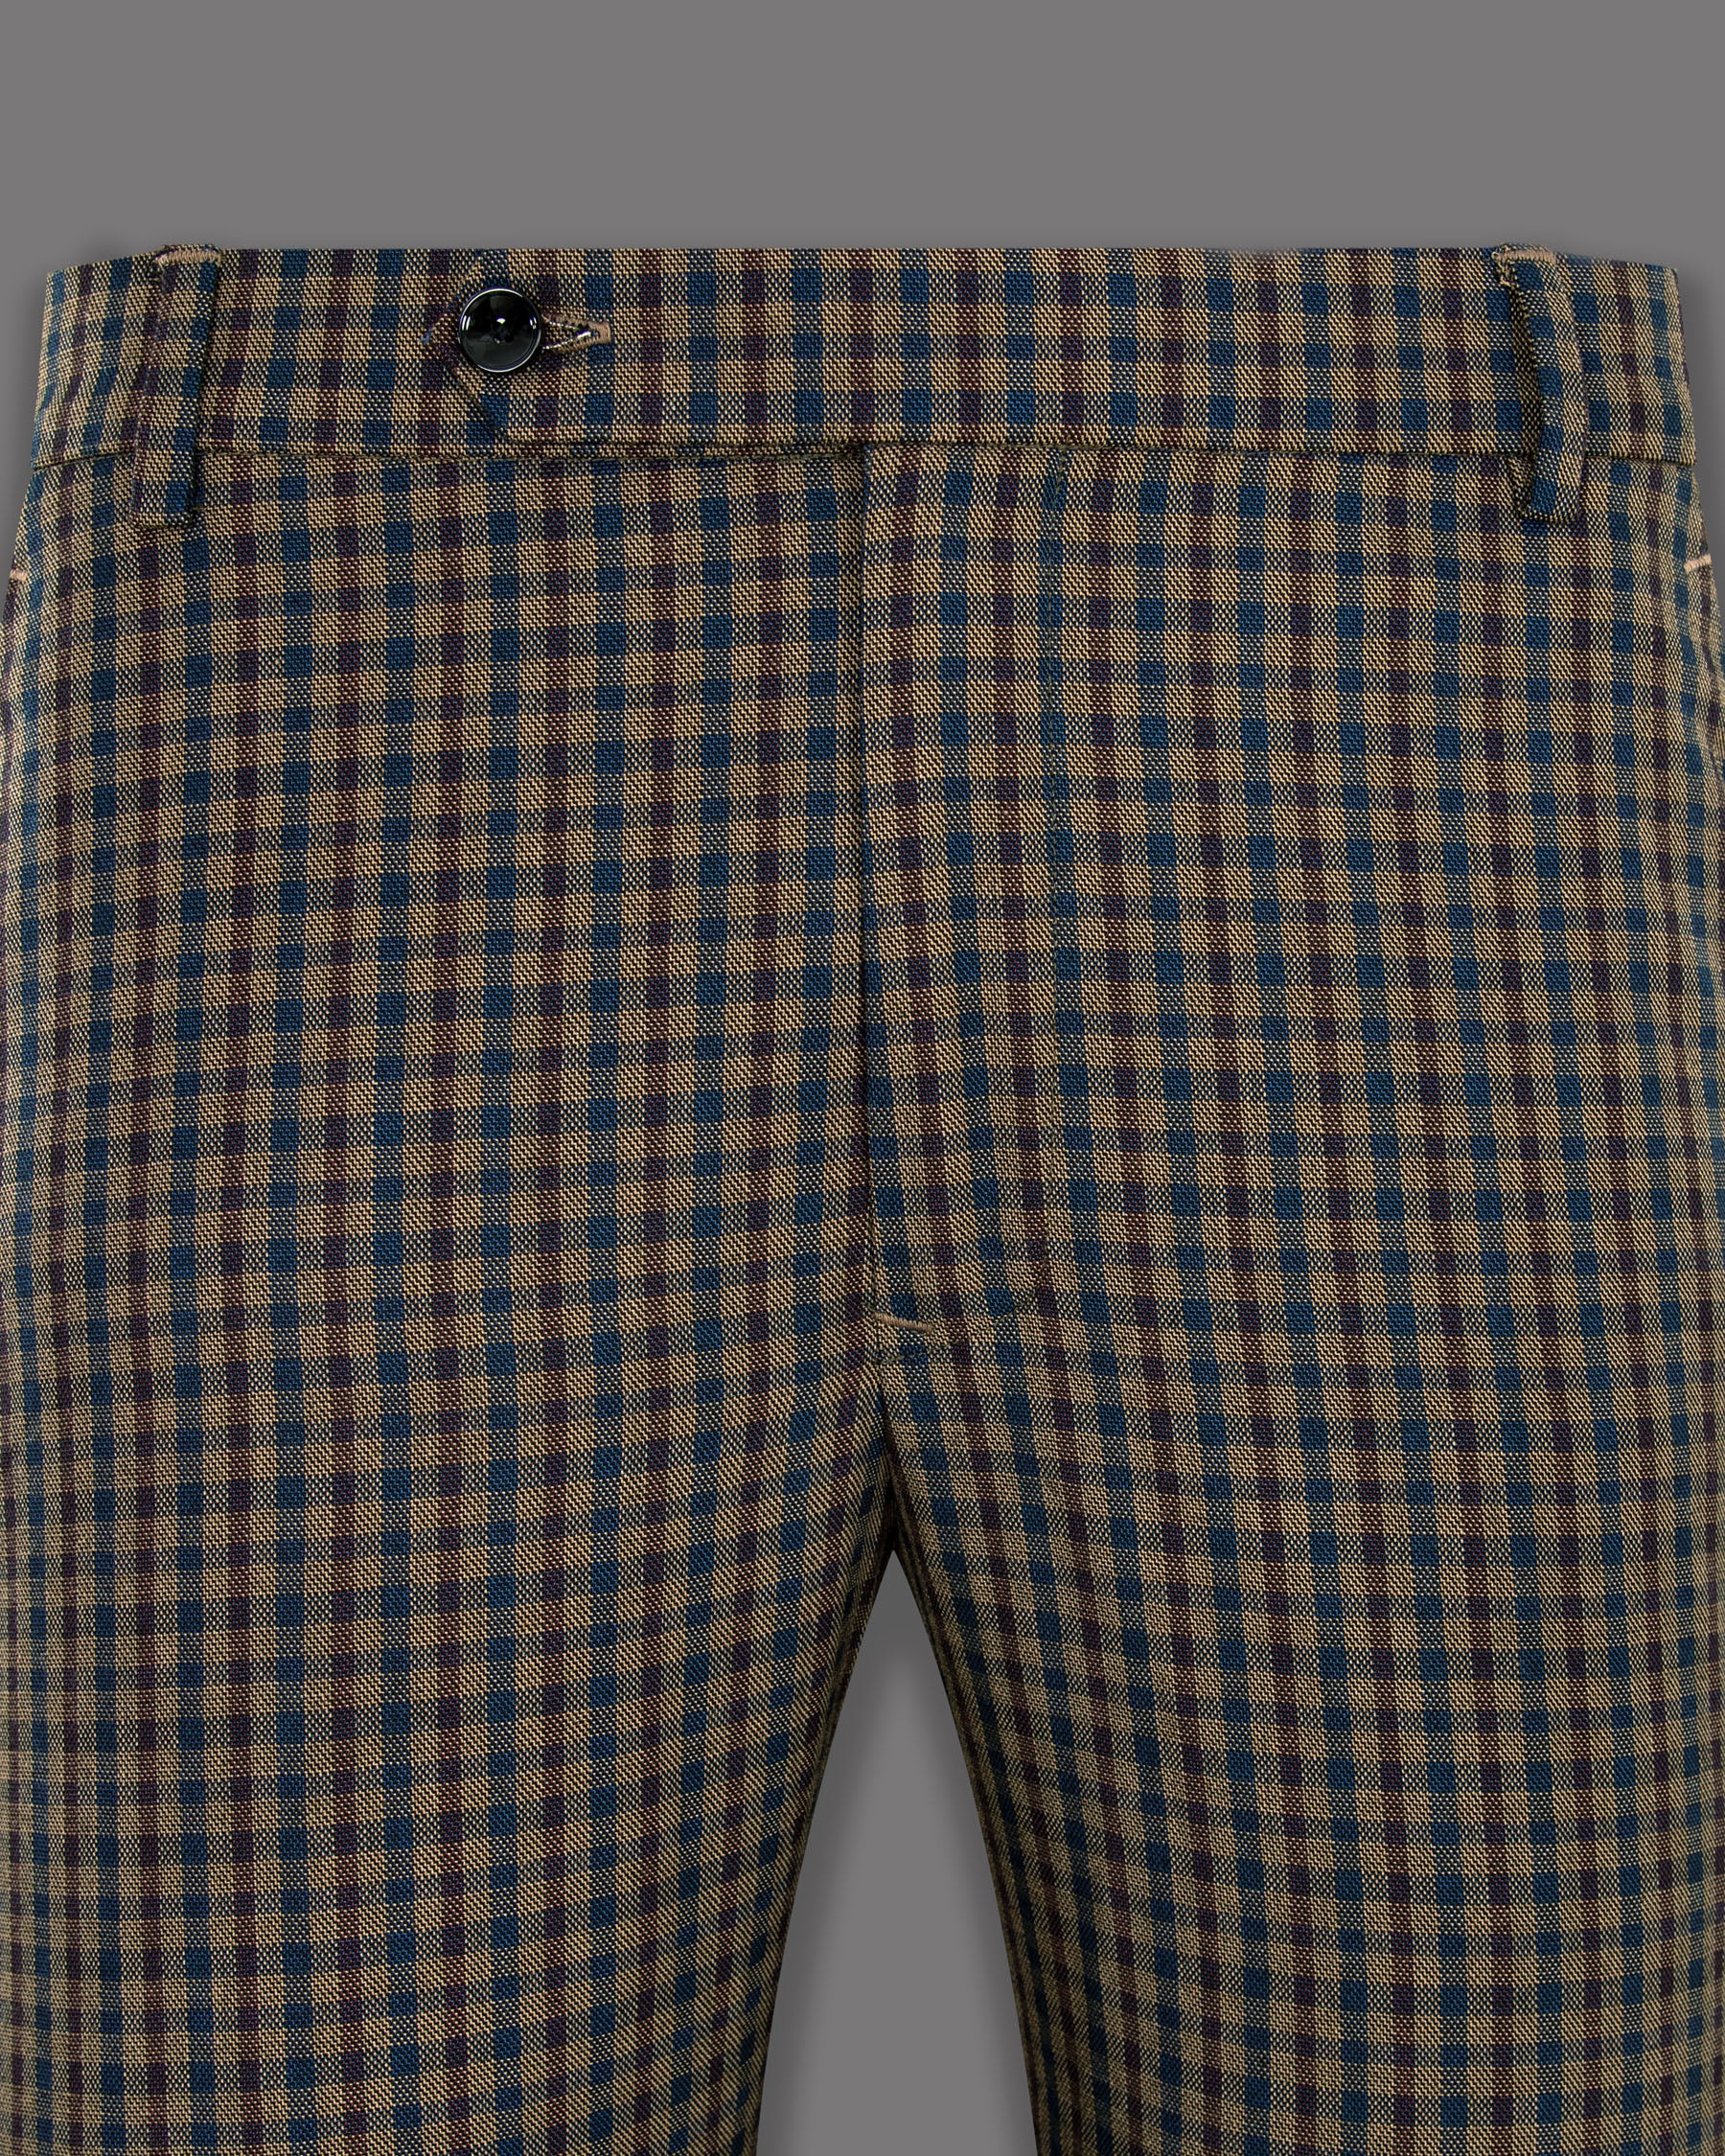 Givry and Blumine Gingham Woolrich Pant T1277-28, T1277-30, T1277-32, T1277-36, T1277-34, T1277-38, T1277-40, T1277-42, T1277-44